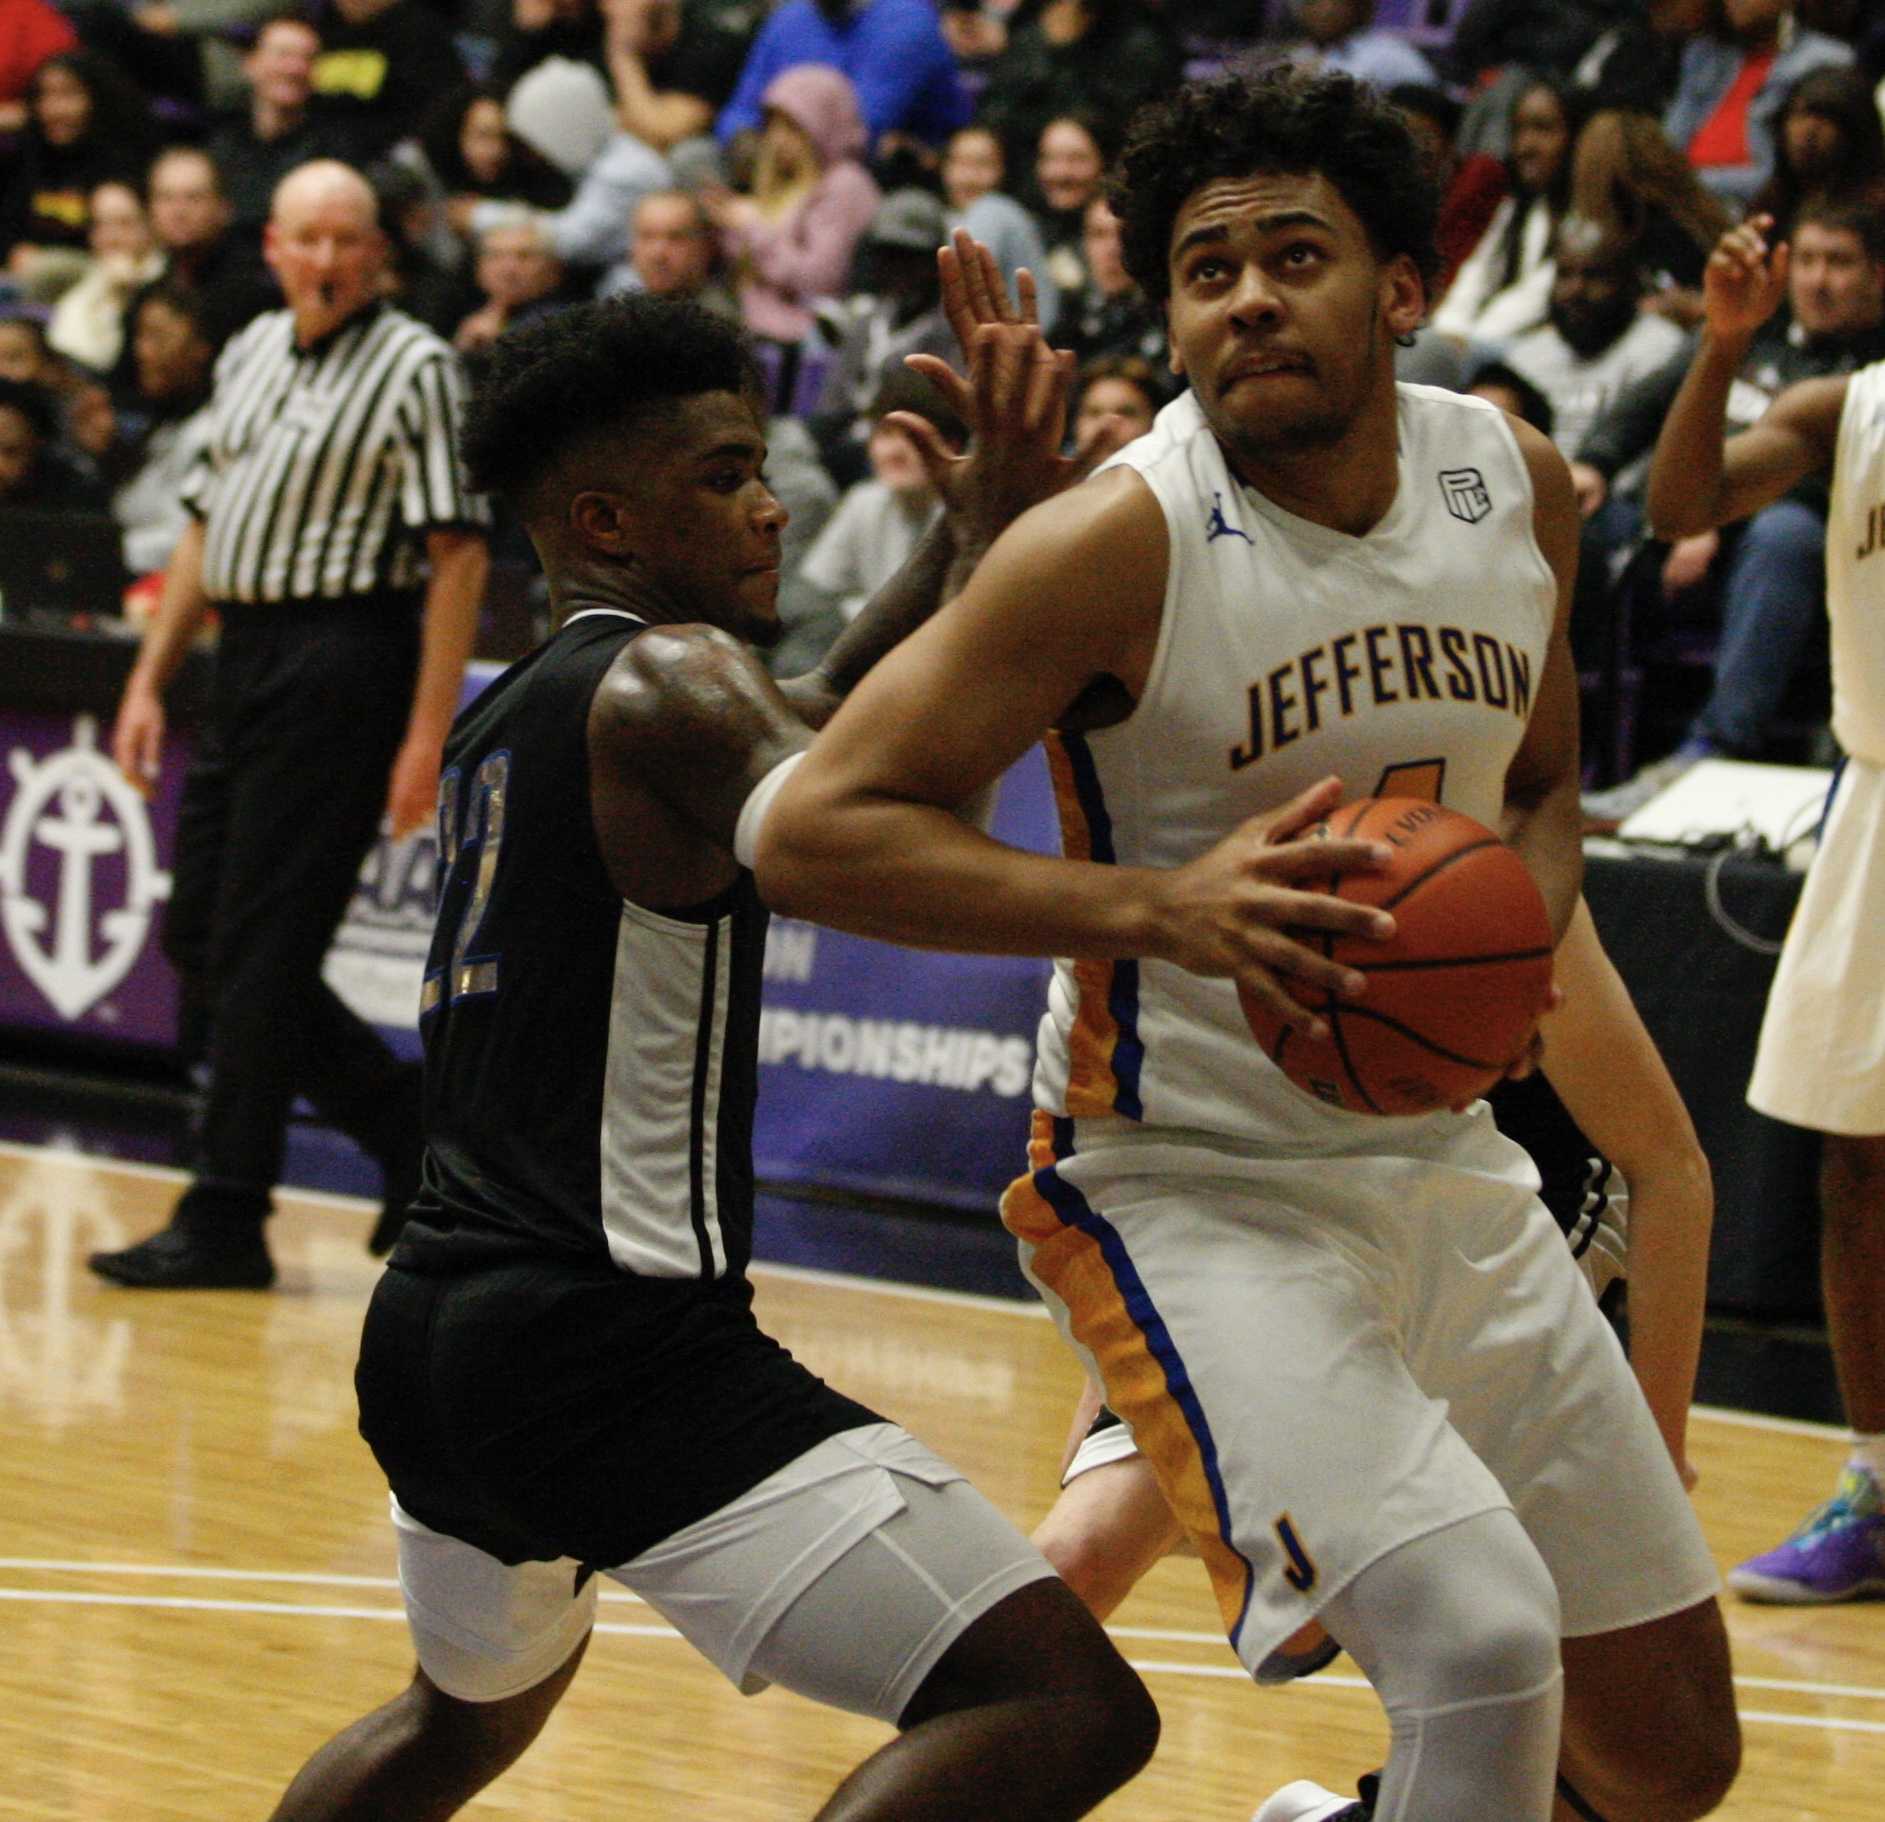 Jefferson's Nate Rawlins-Kibonge powers through Grant's Ty Rankin on his way to the basket. (Norm Maves Jr.)